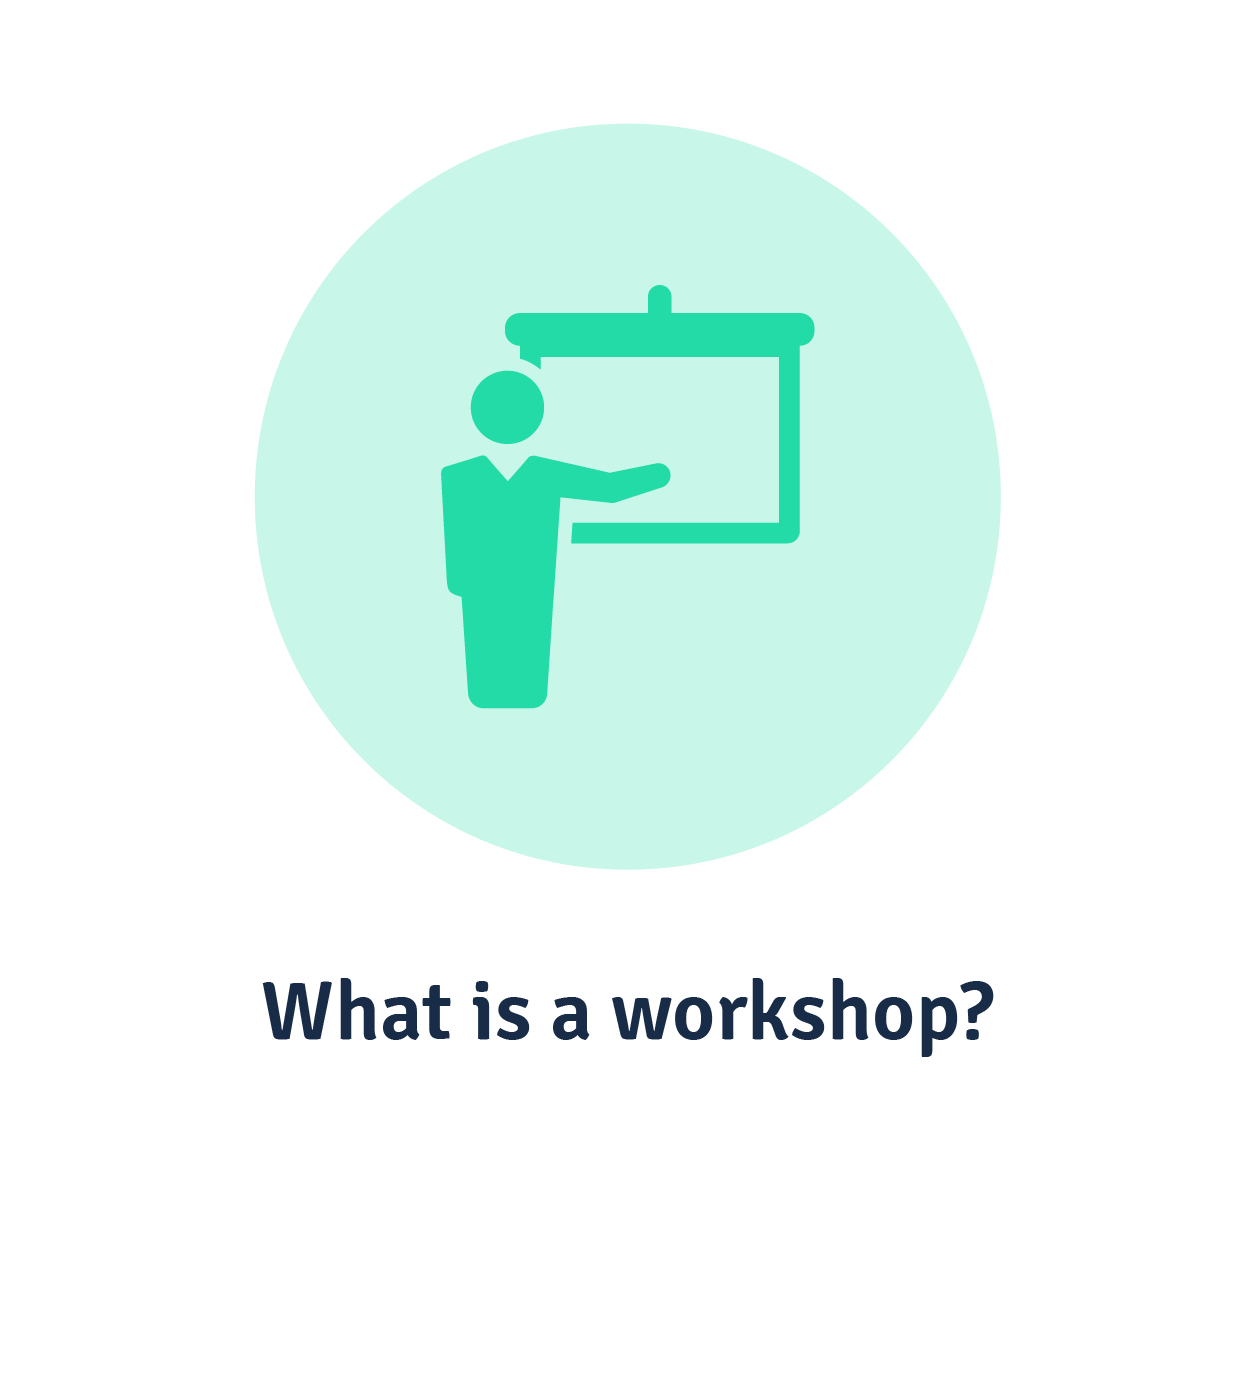 What is a workshop?